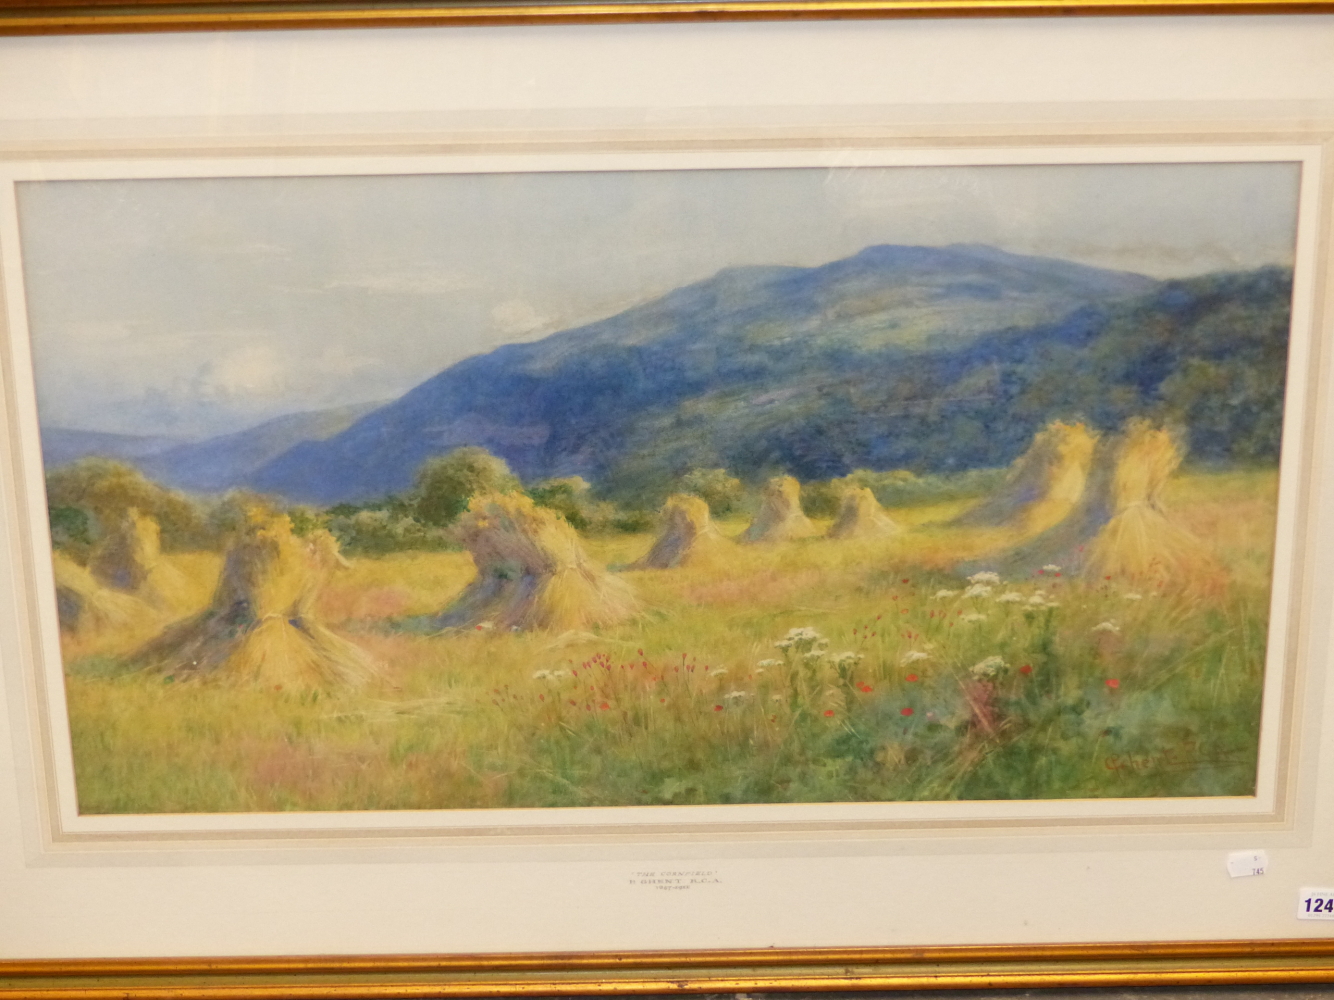 B GHENT (1857-1911). THE CORNFIELD, SIGNED WATERCOLOUR, 41 x 74cms. - Image 2 of 6